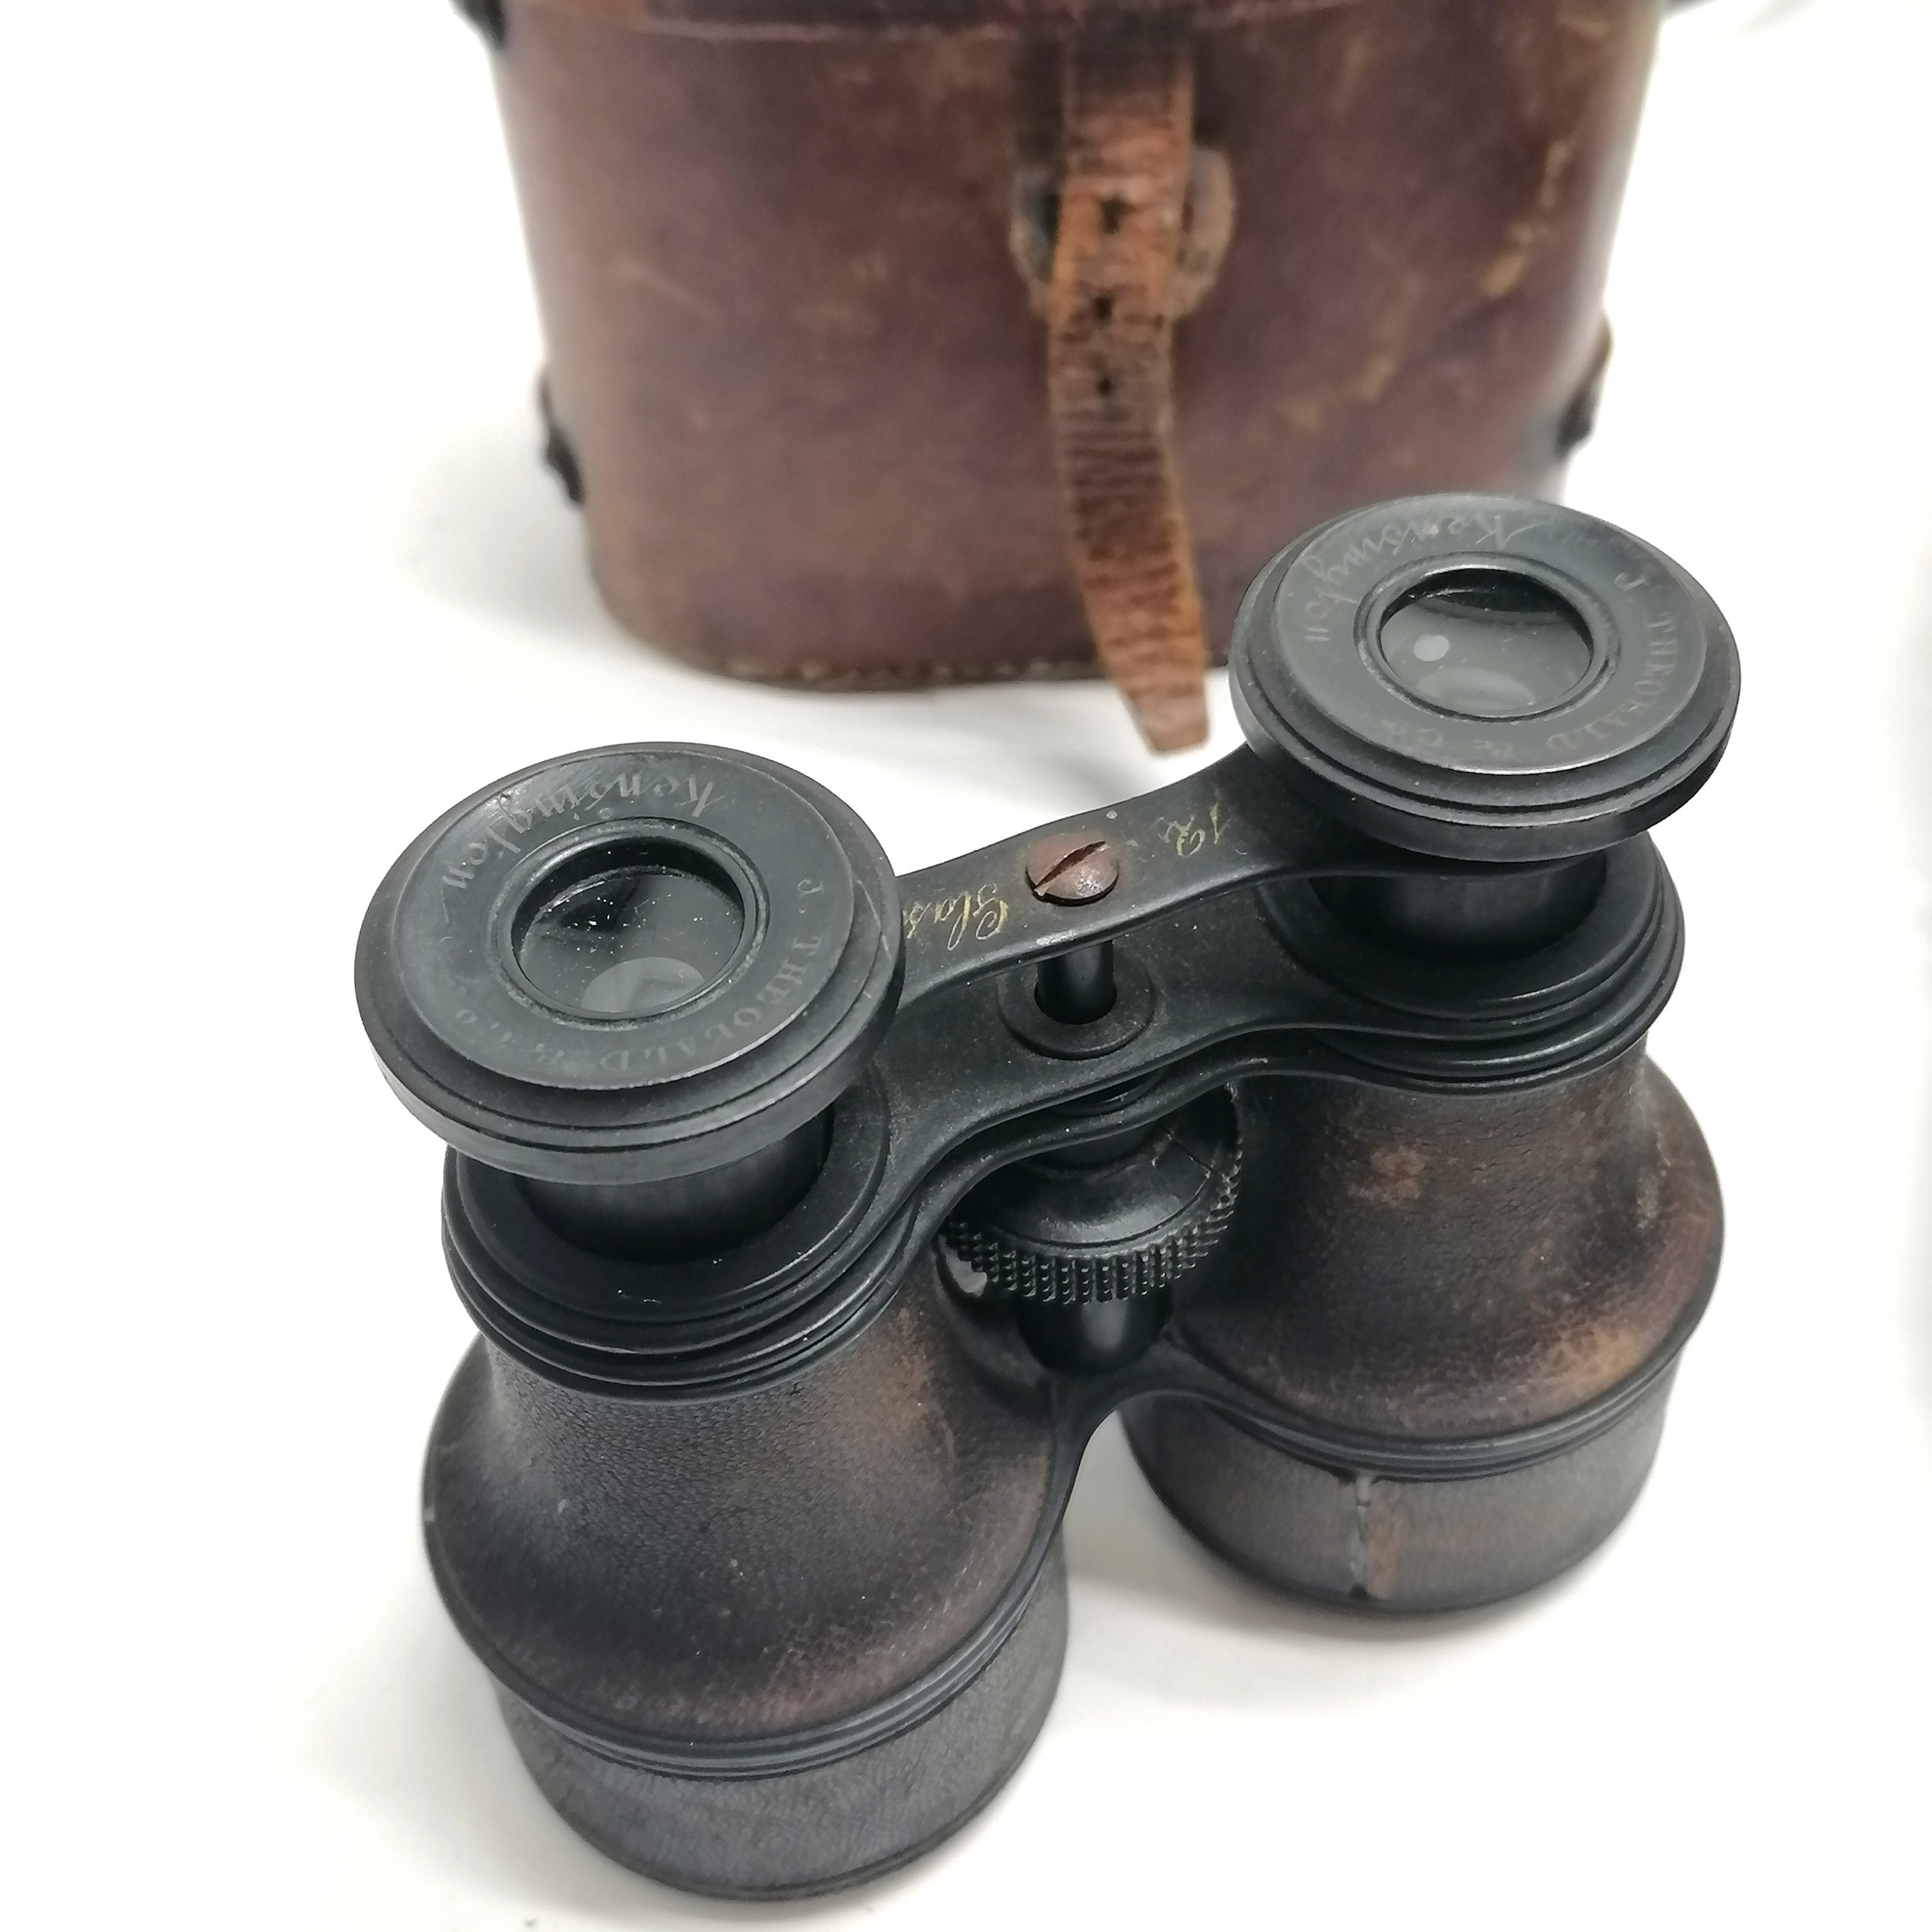 6 pairs of binoculars including antique J Theobald & Co. the Kensington in A/F leather case - Image 4 of 4